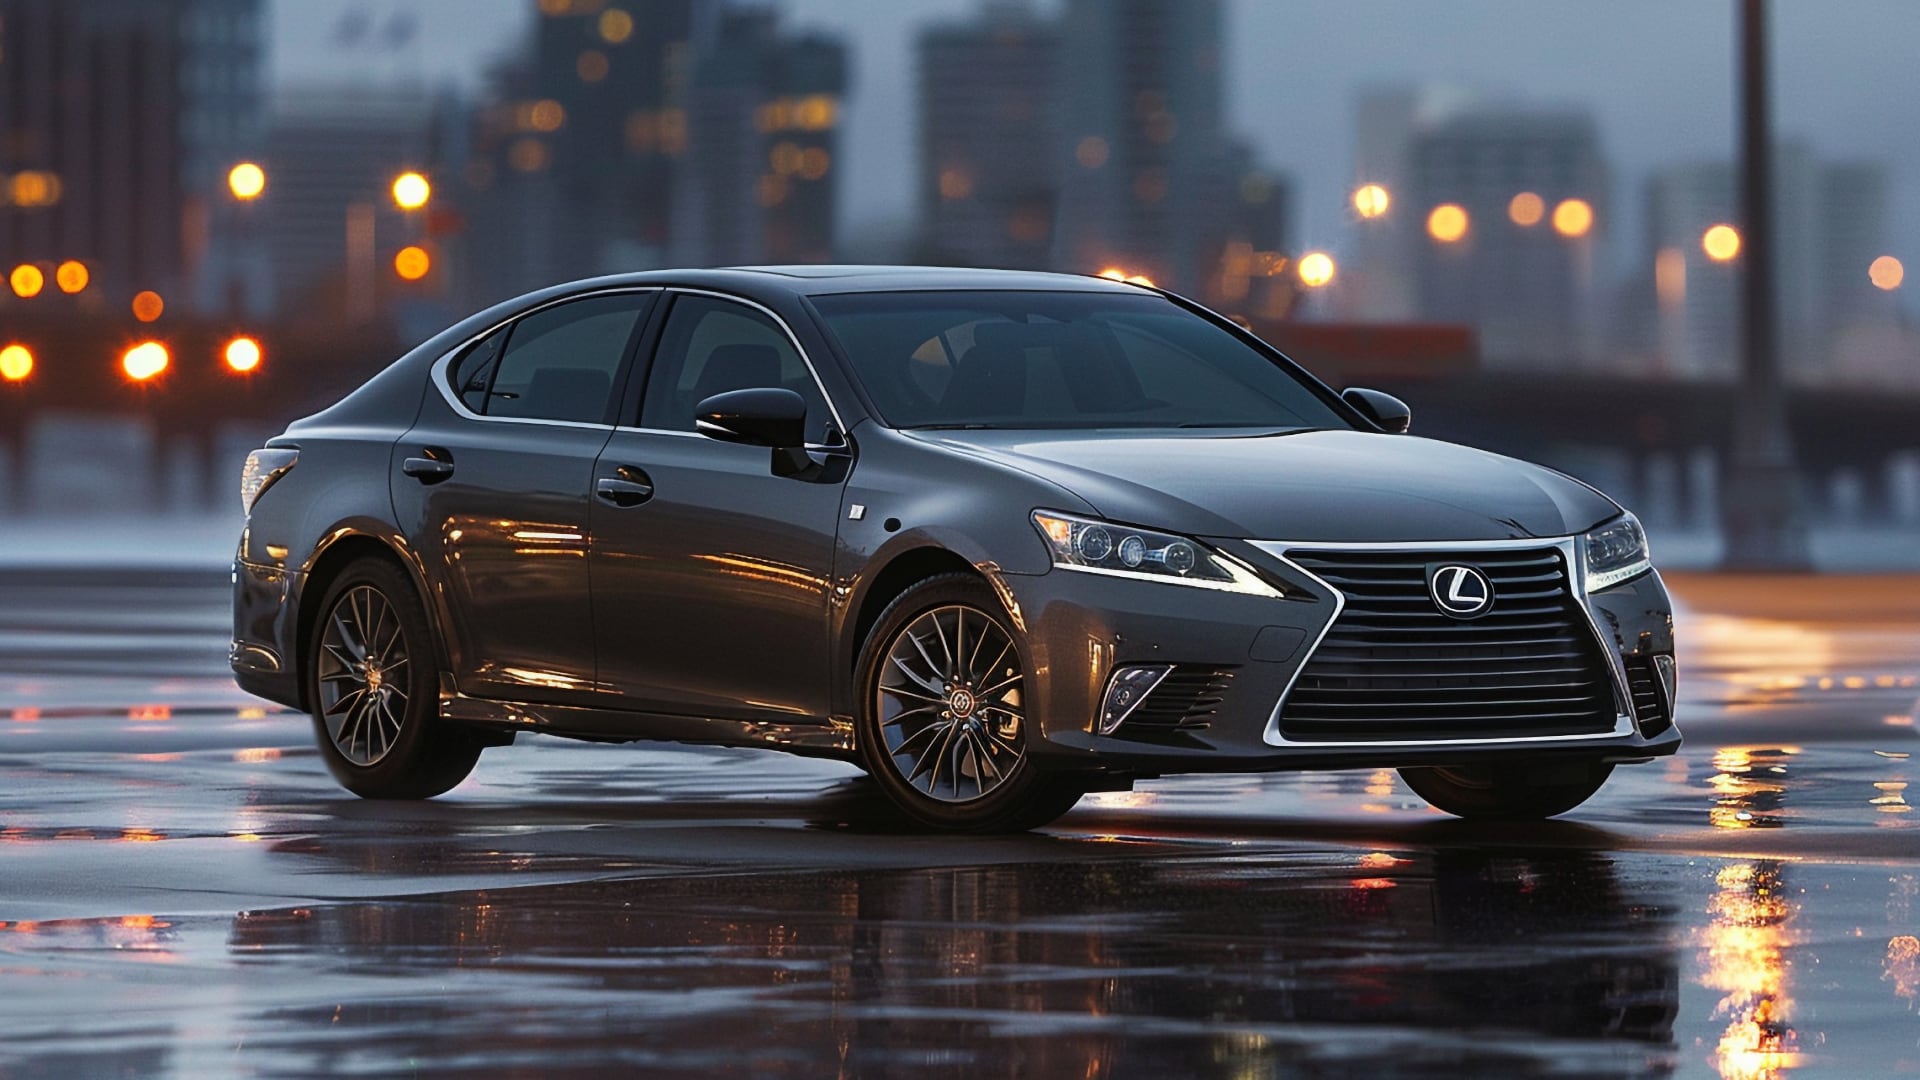 The 2018 Lexus ES 350 is parked on a wet street.